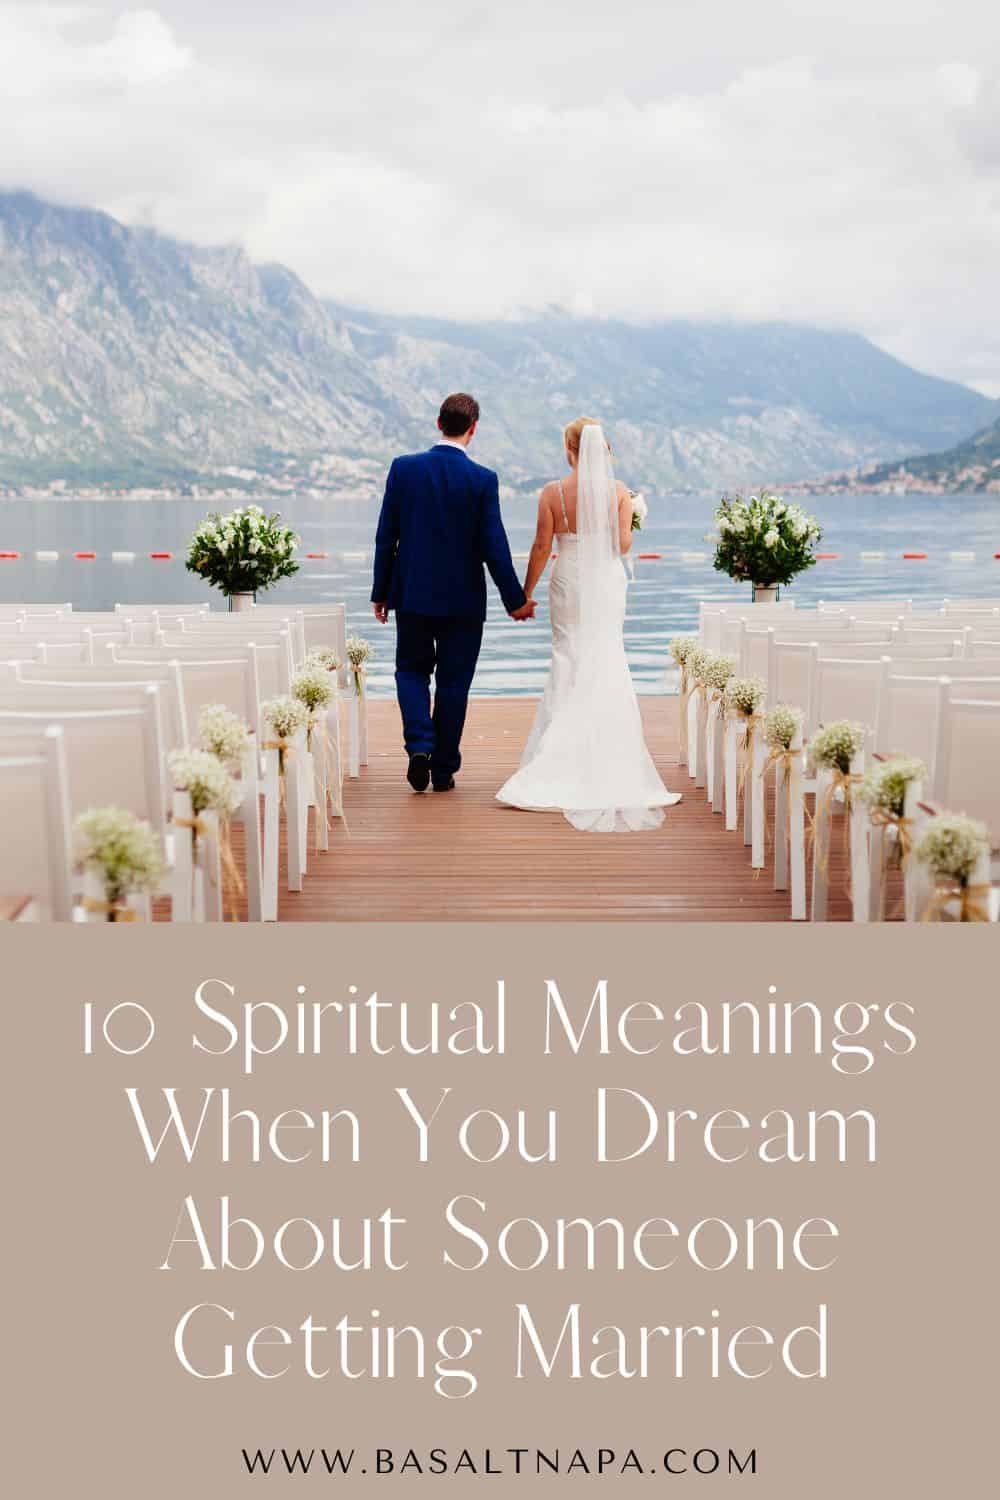 10 Spiritual Meanings When You Dream About Someone Getting Married